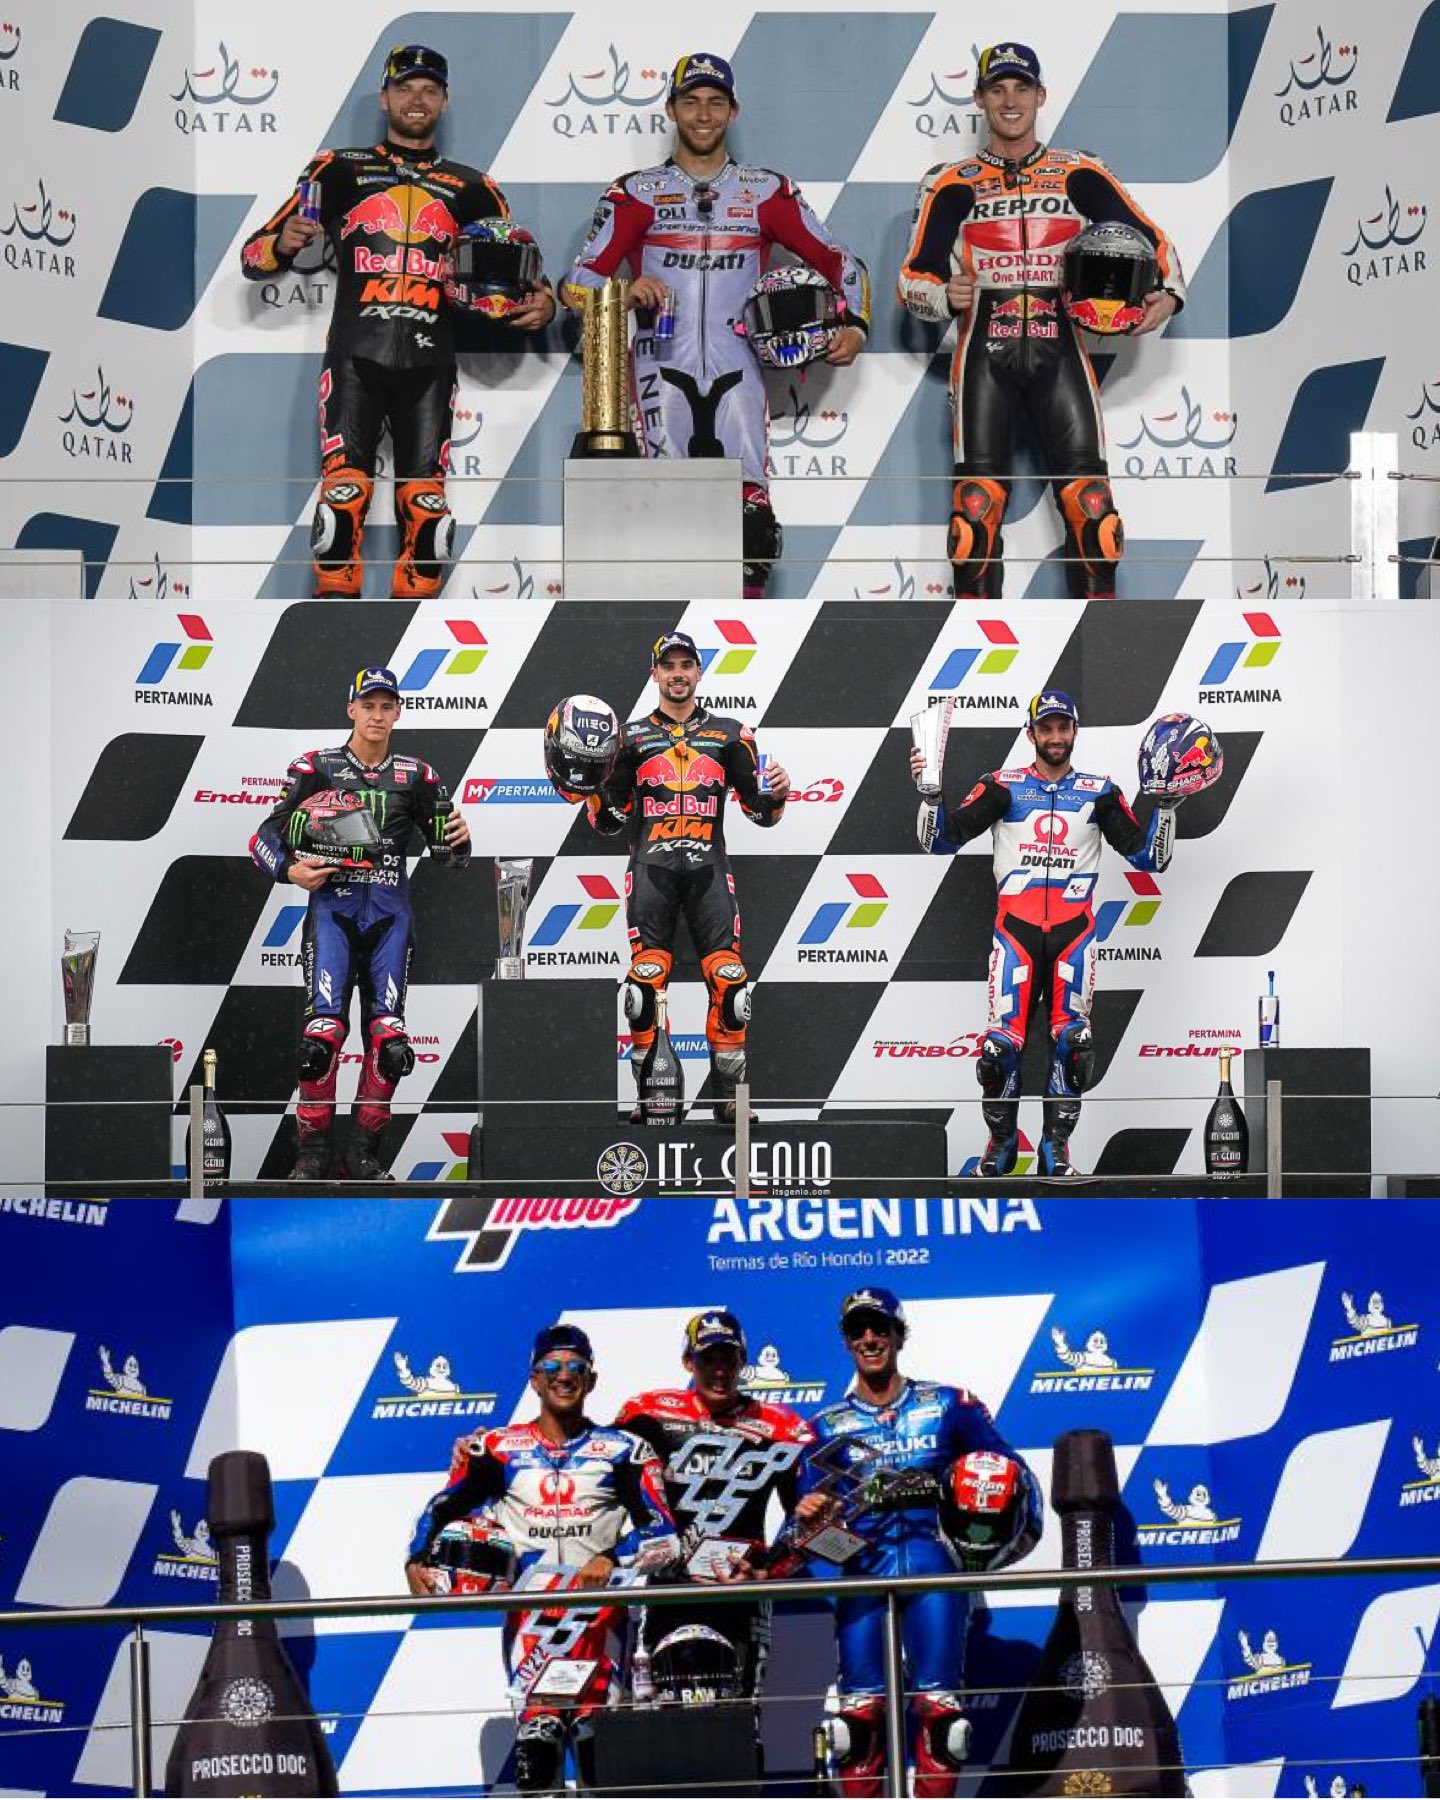 Moto GP 2022 - Page 10 FPhPd8dWQAUA0by?format=jpg&name=large